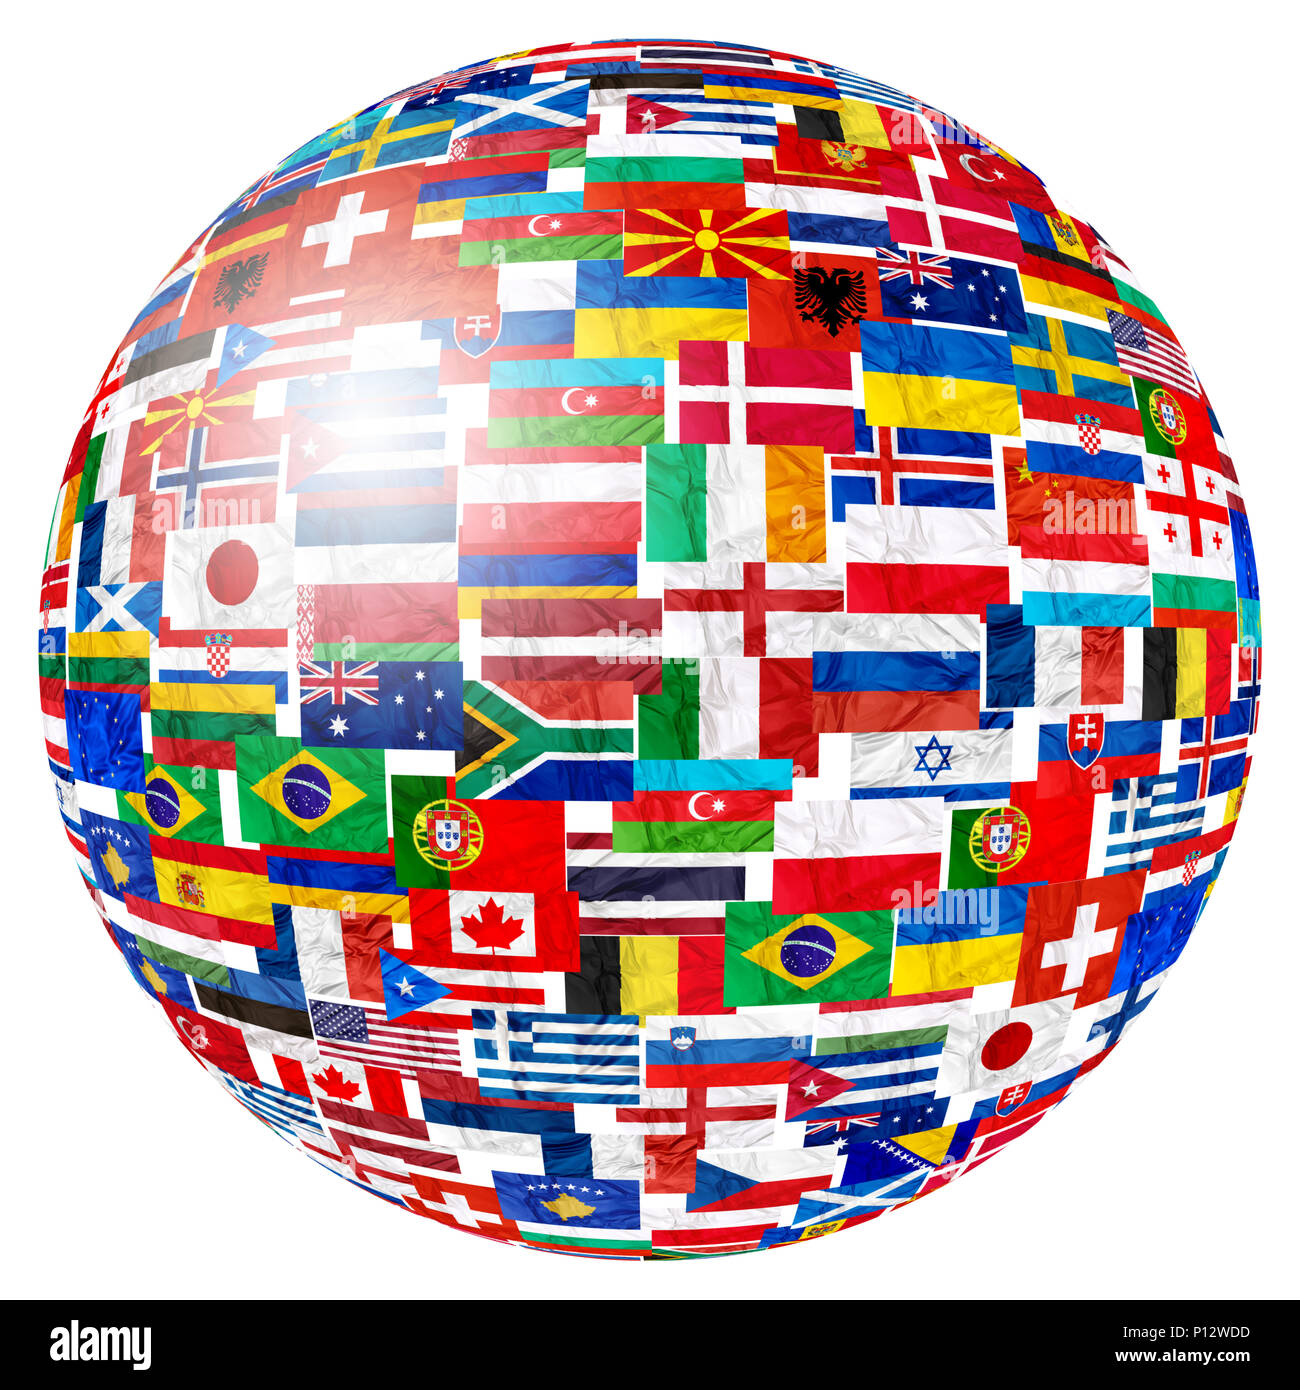 Flags of world countries and in sphere globe shape on white background: England Russia Italy Spain Scotland Germany US, China Greece France Brazil Jap Stock Photo